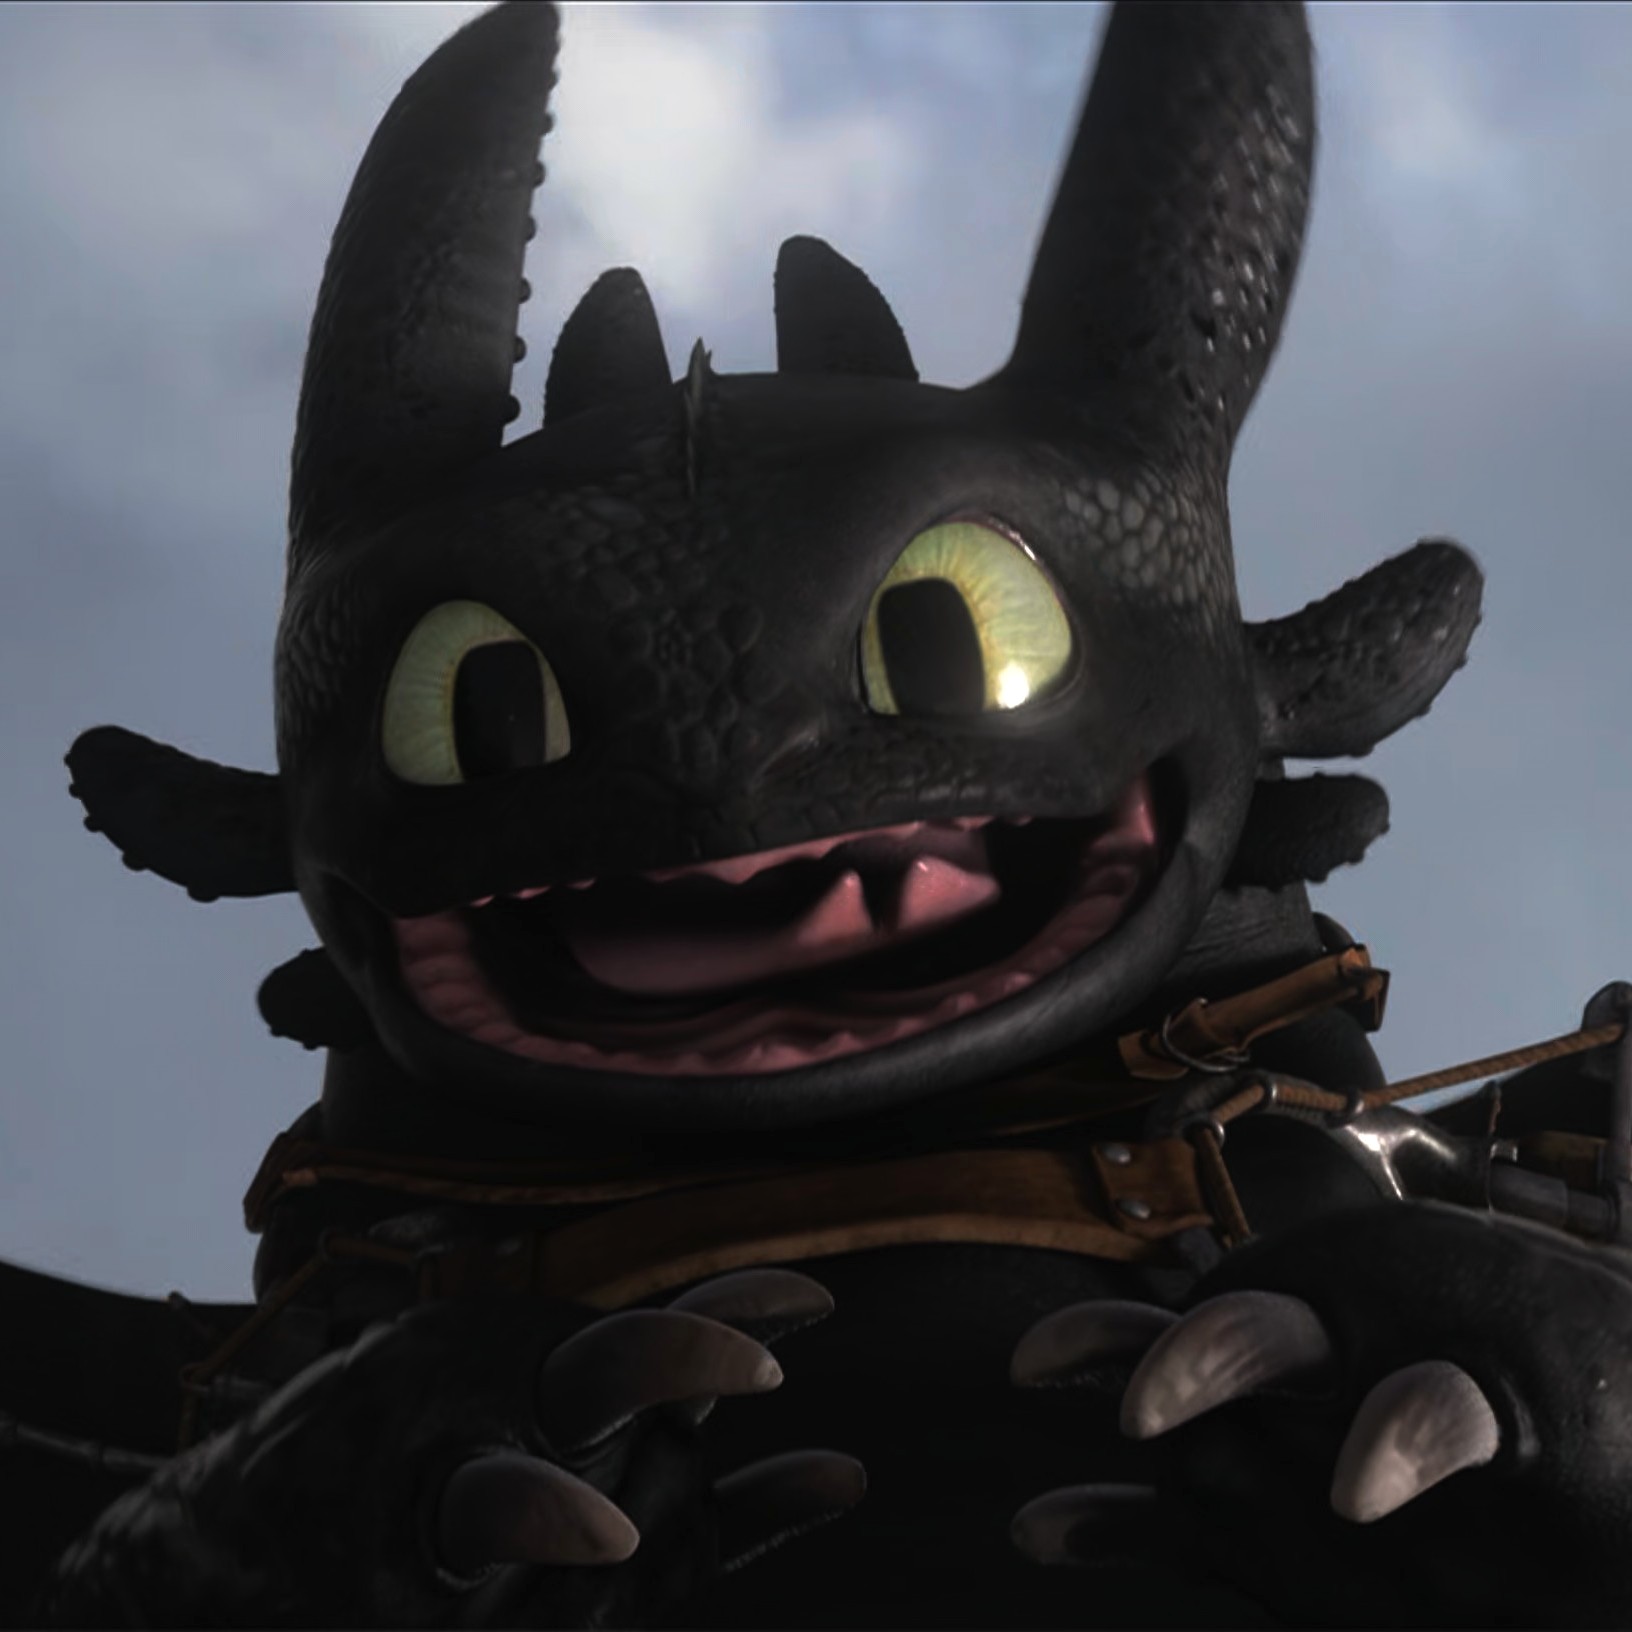 Toothless pic n°13